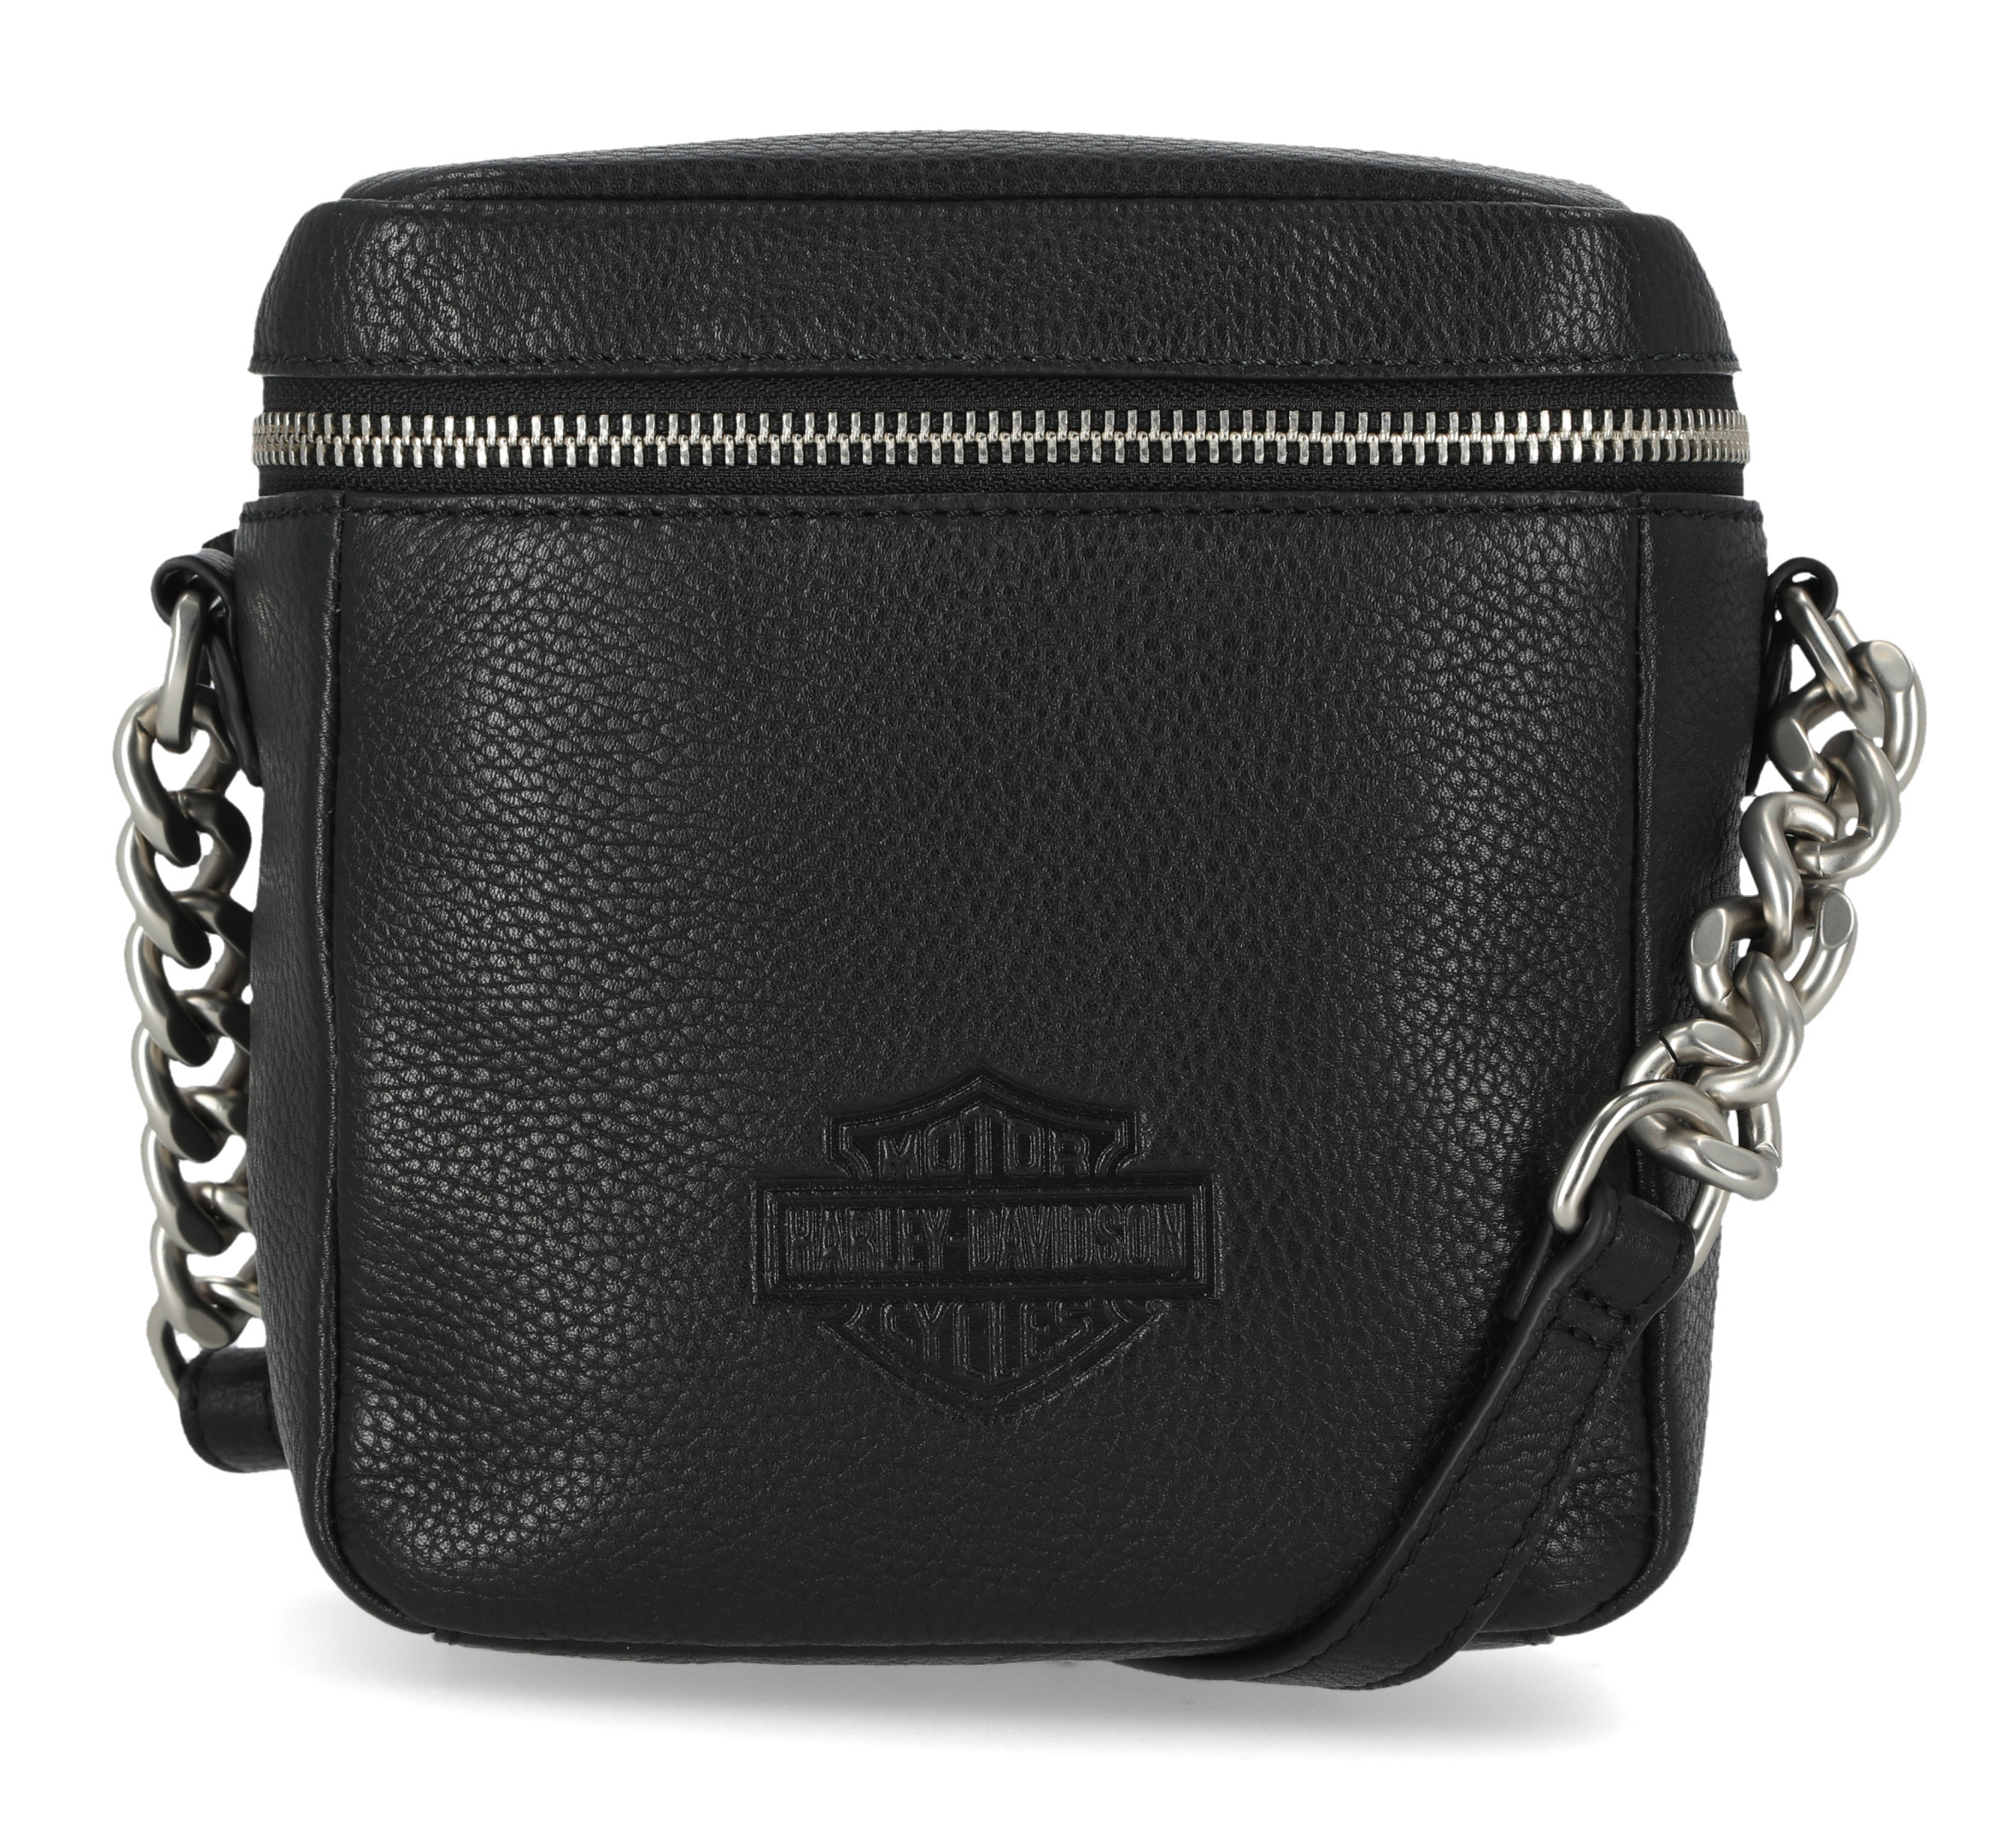 Harley-Davidson Leather Tote Bags for Women